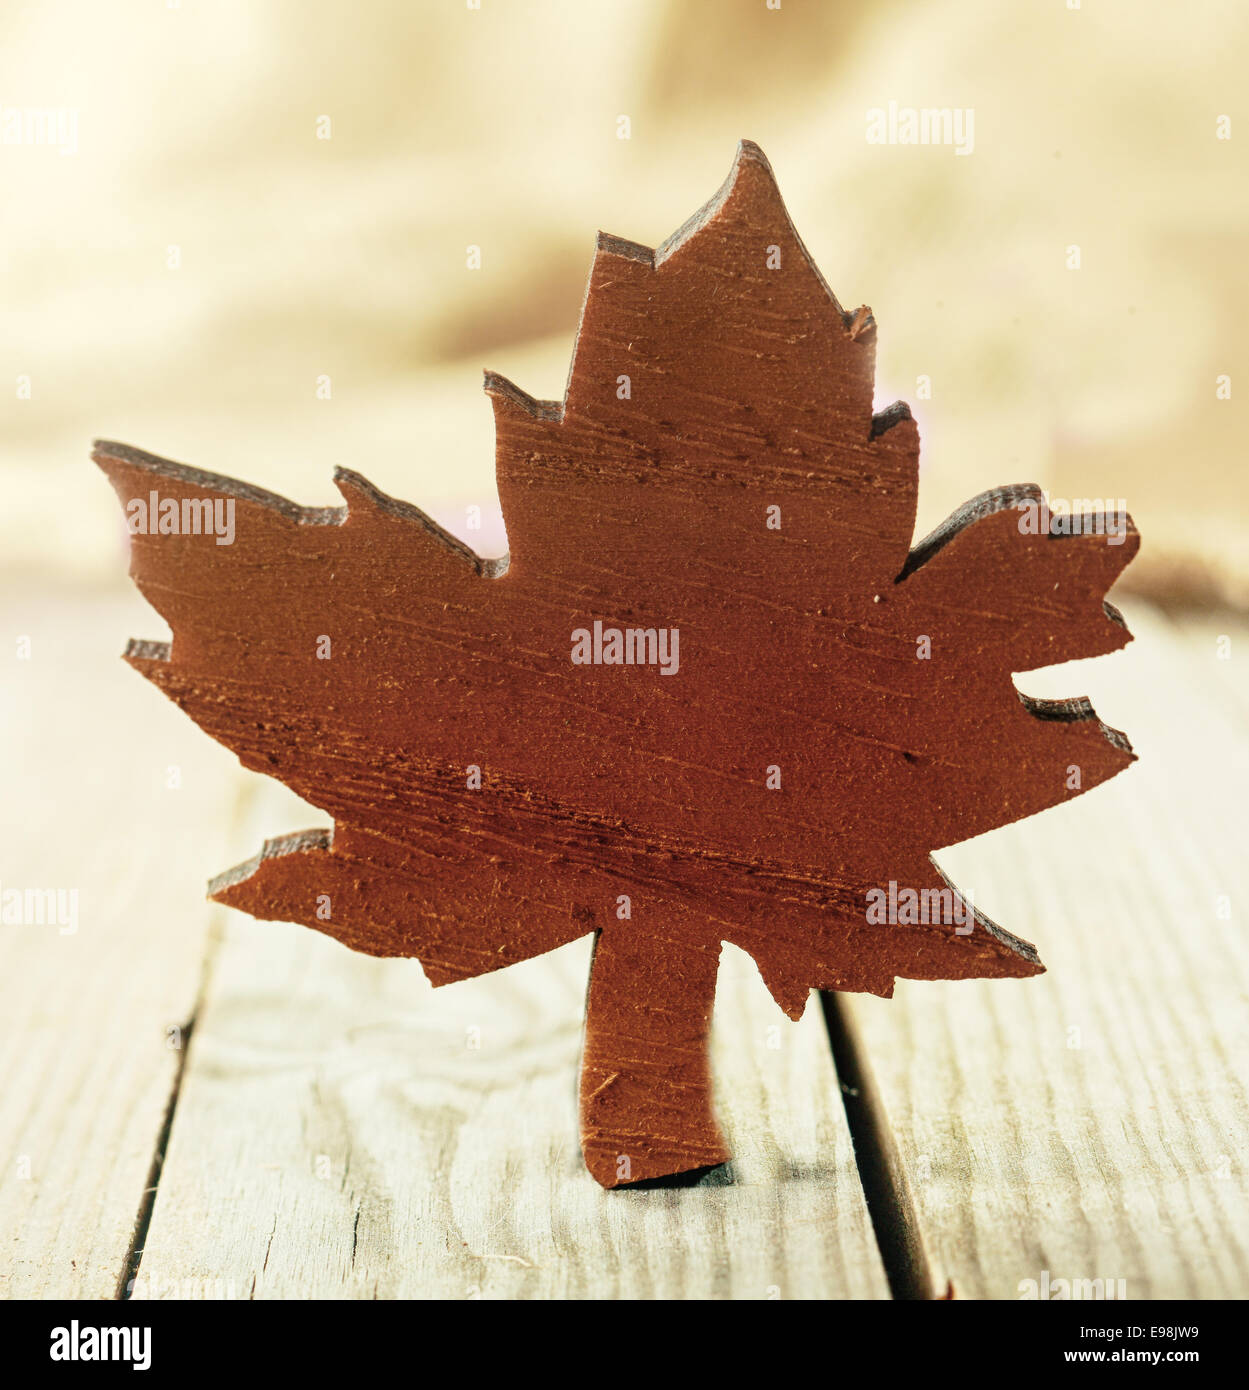 Rustic wooden Xmas maple leaf handicraft cut out decoration on an old weathered wooden table with textured background, square format Stock Photo